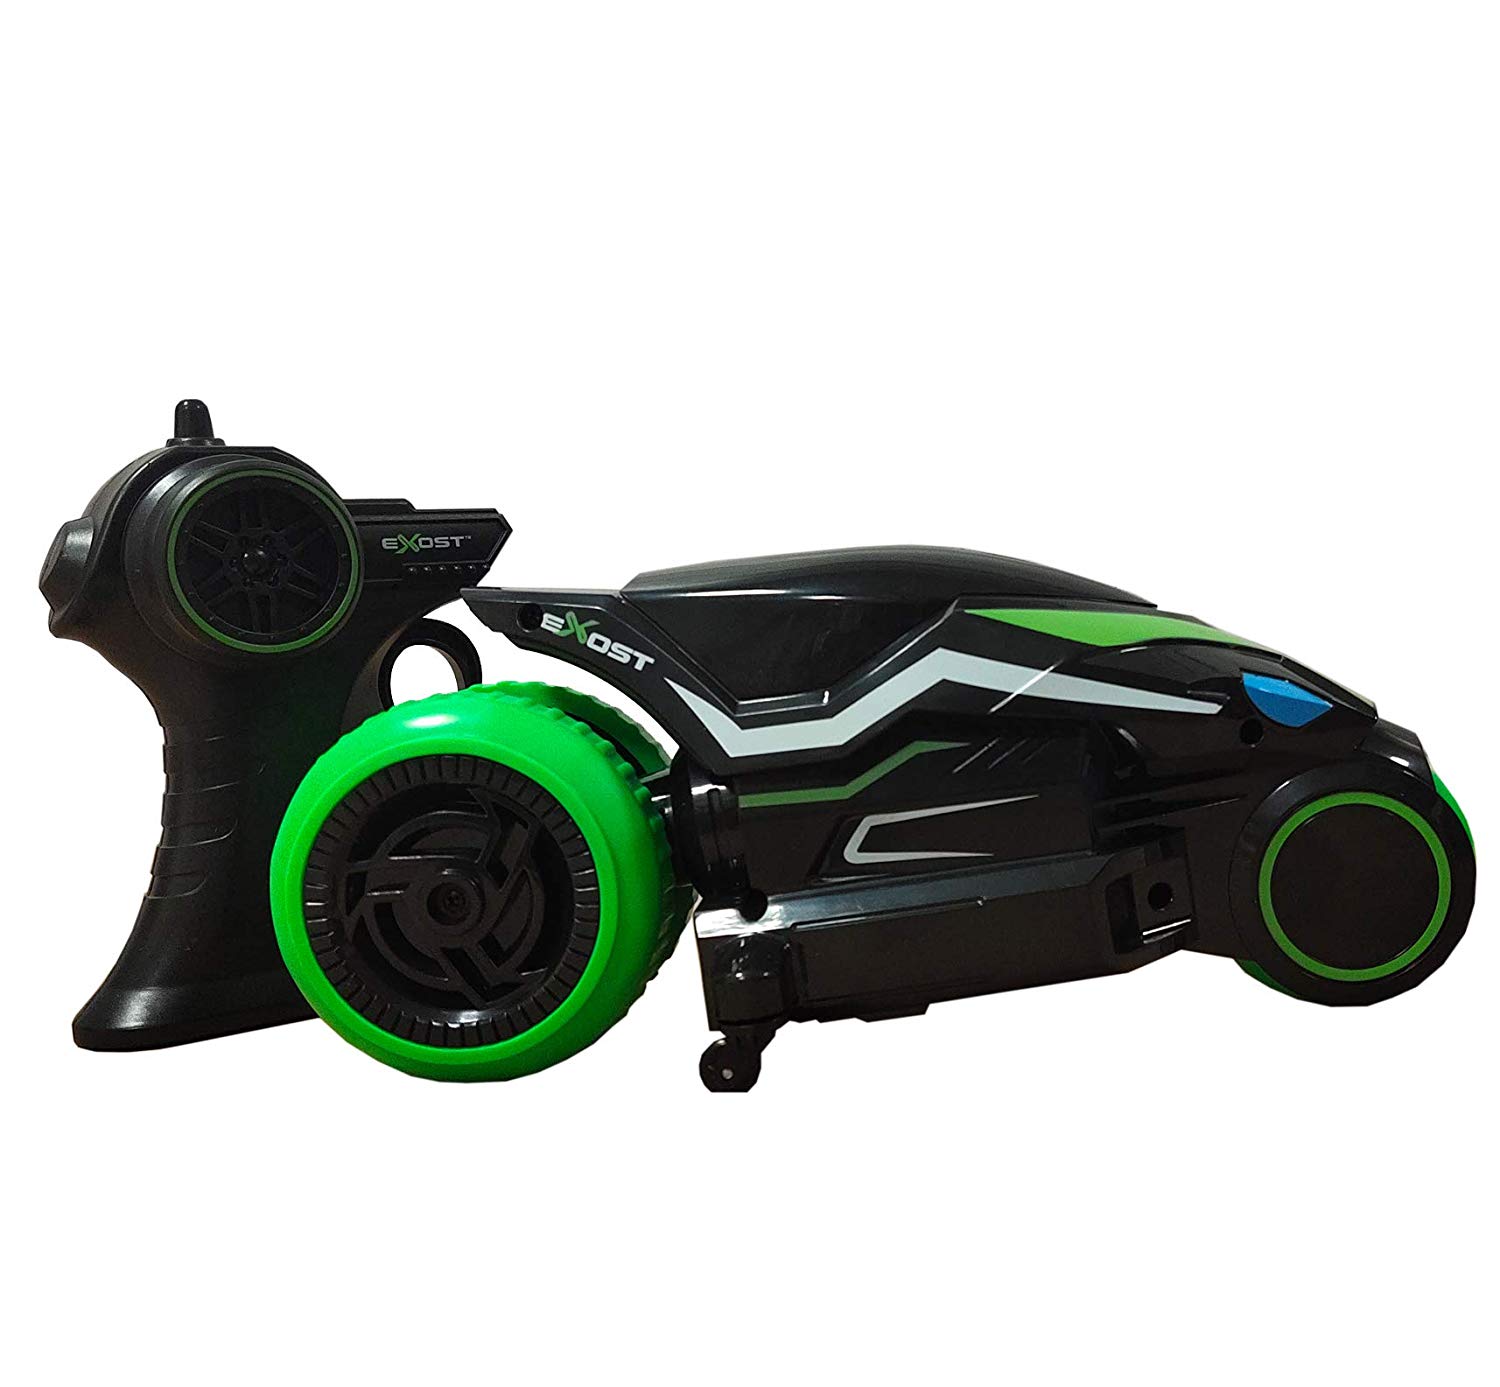 remote control motorcycle toy